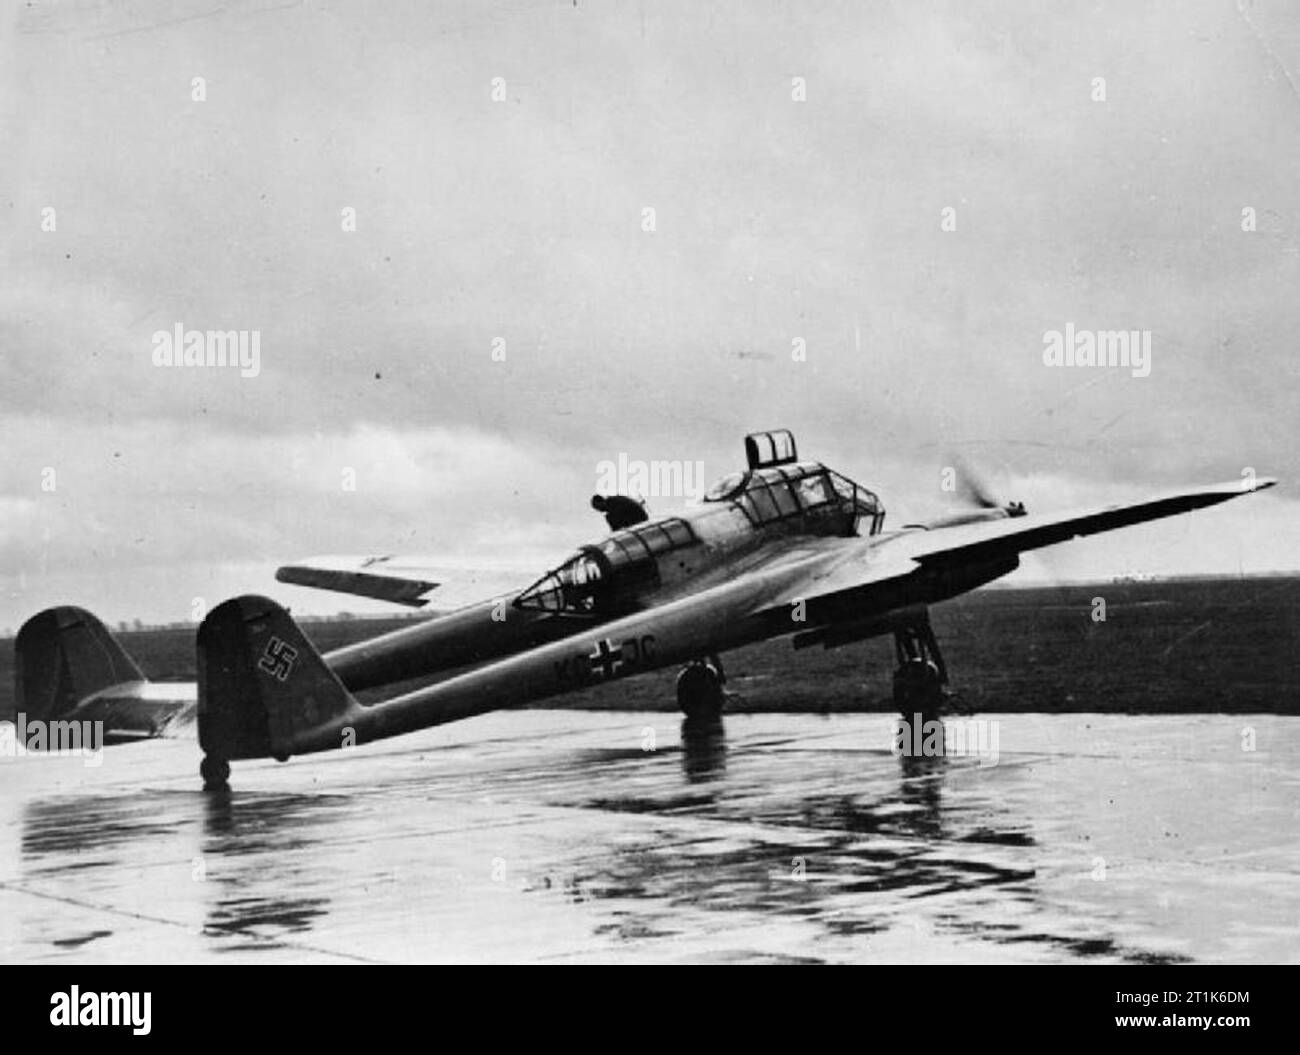 German Military Aircraft 1939-1945 Focke-Wulf Fw 189A. The twin-fuselage Fw 189 was designed as a light-bomber but saw service mostly as a short-range reconnaissance and liaison aircraft on the Eastern Front. Stock Photo